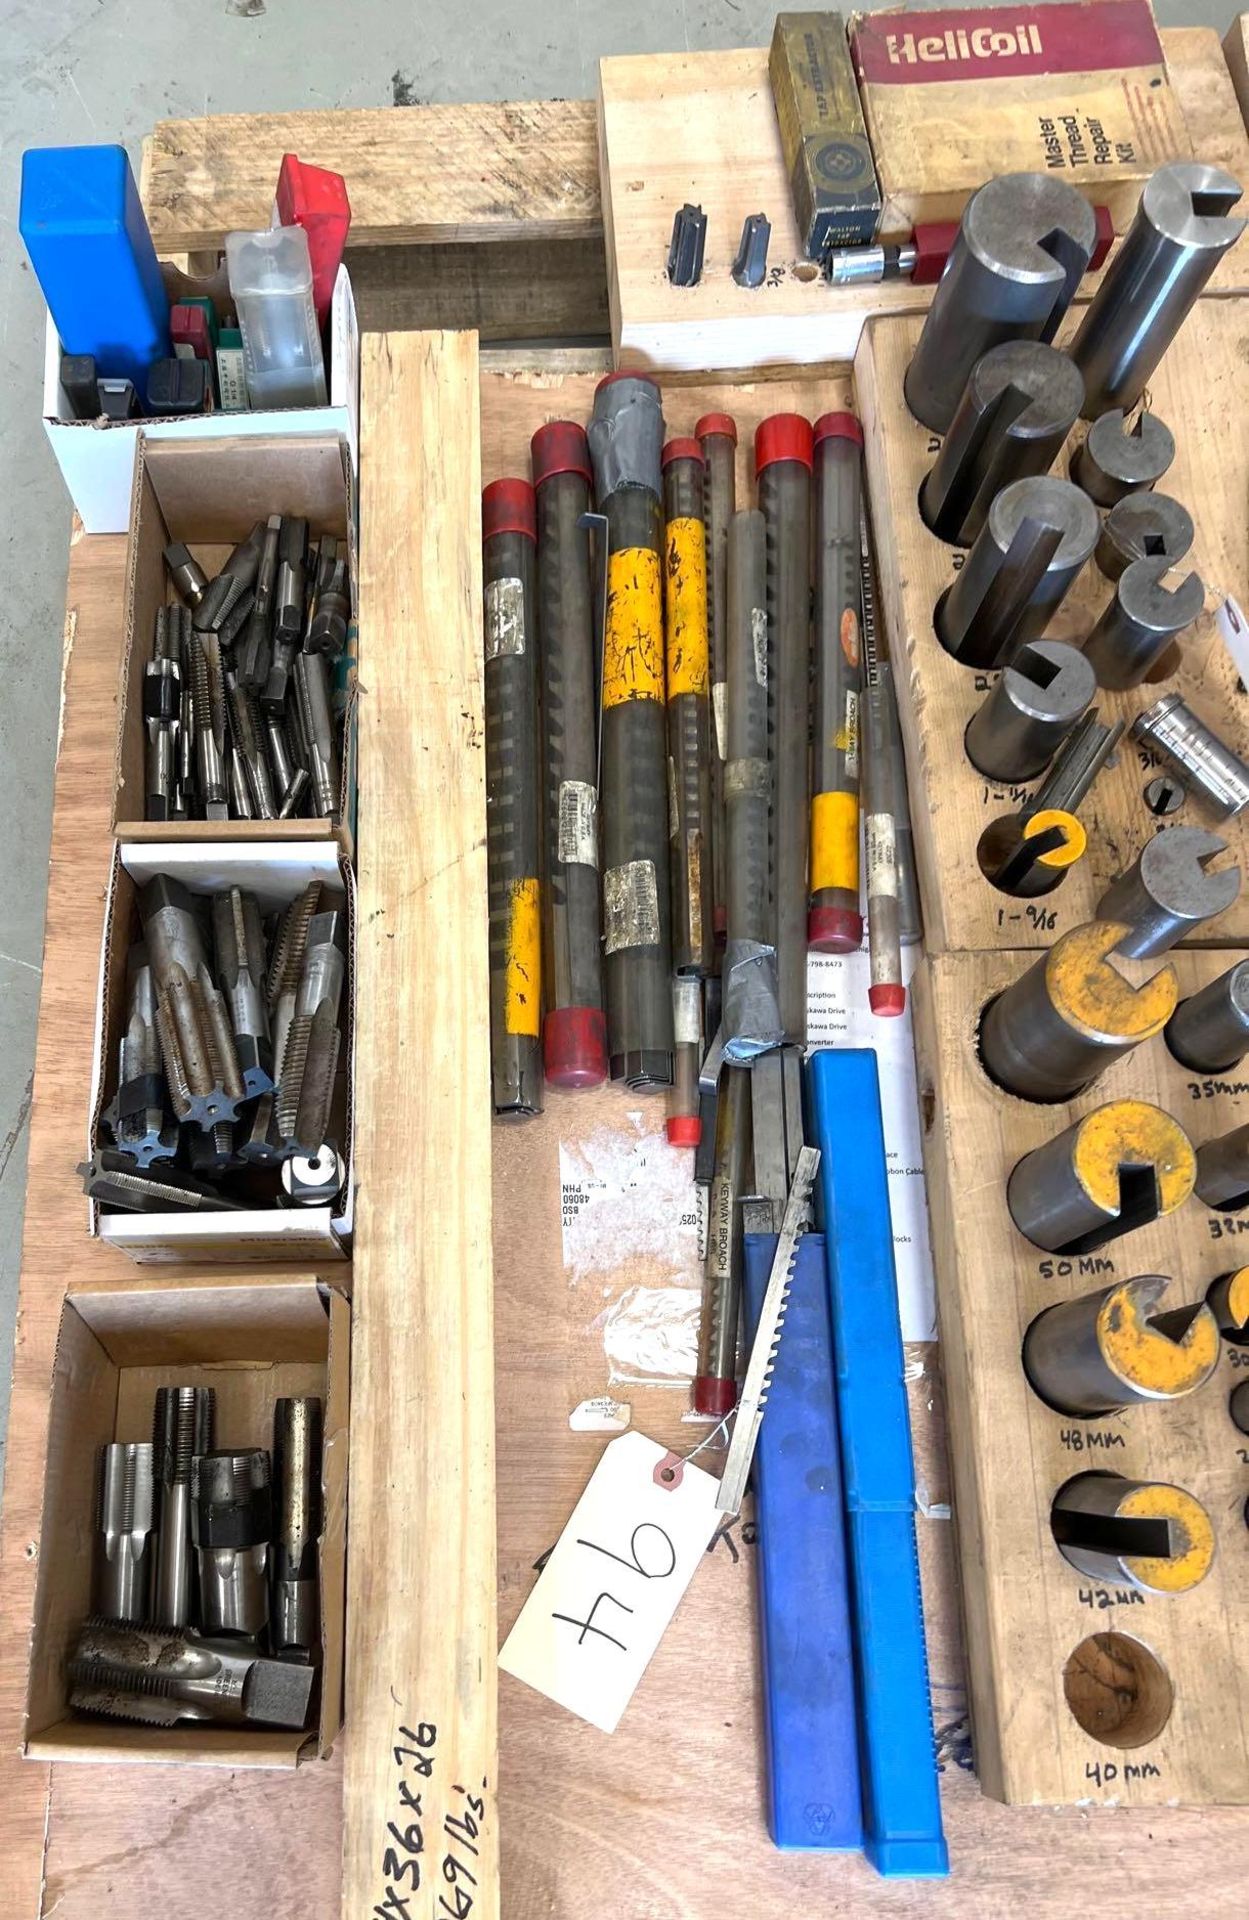 Lot of Broaching Tools, Taps, & Helicoil Items on Skid - Image 5 of 7